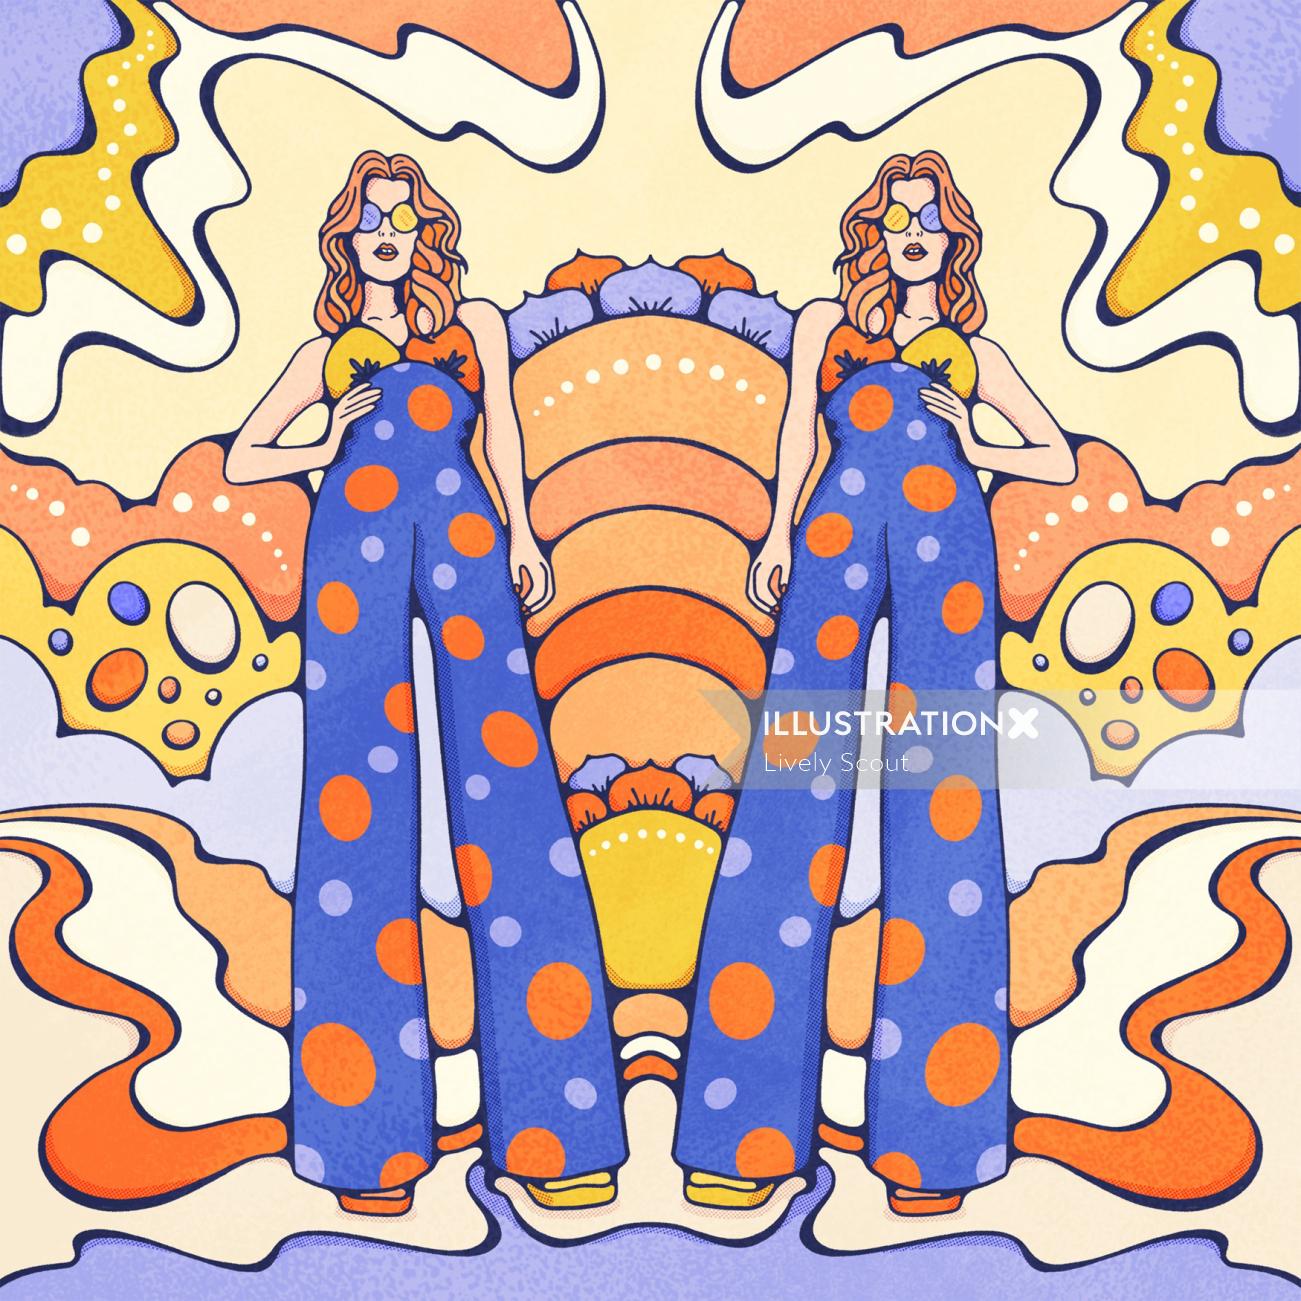 Twins in 70s inspired jumpsuits against bold psychedelic background